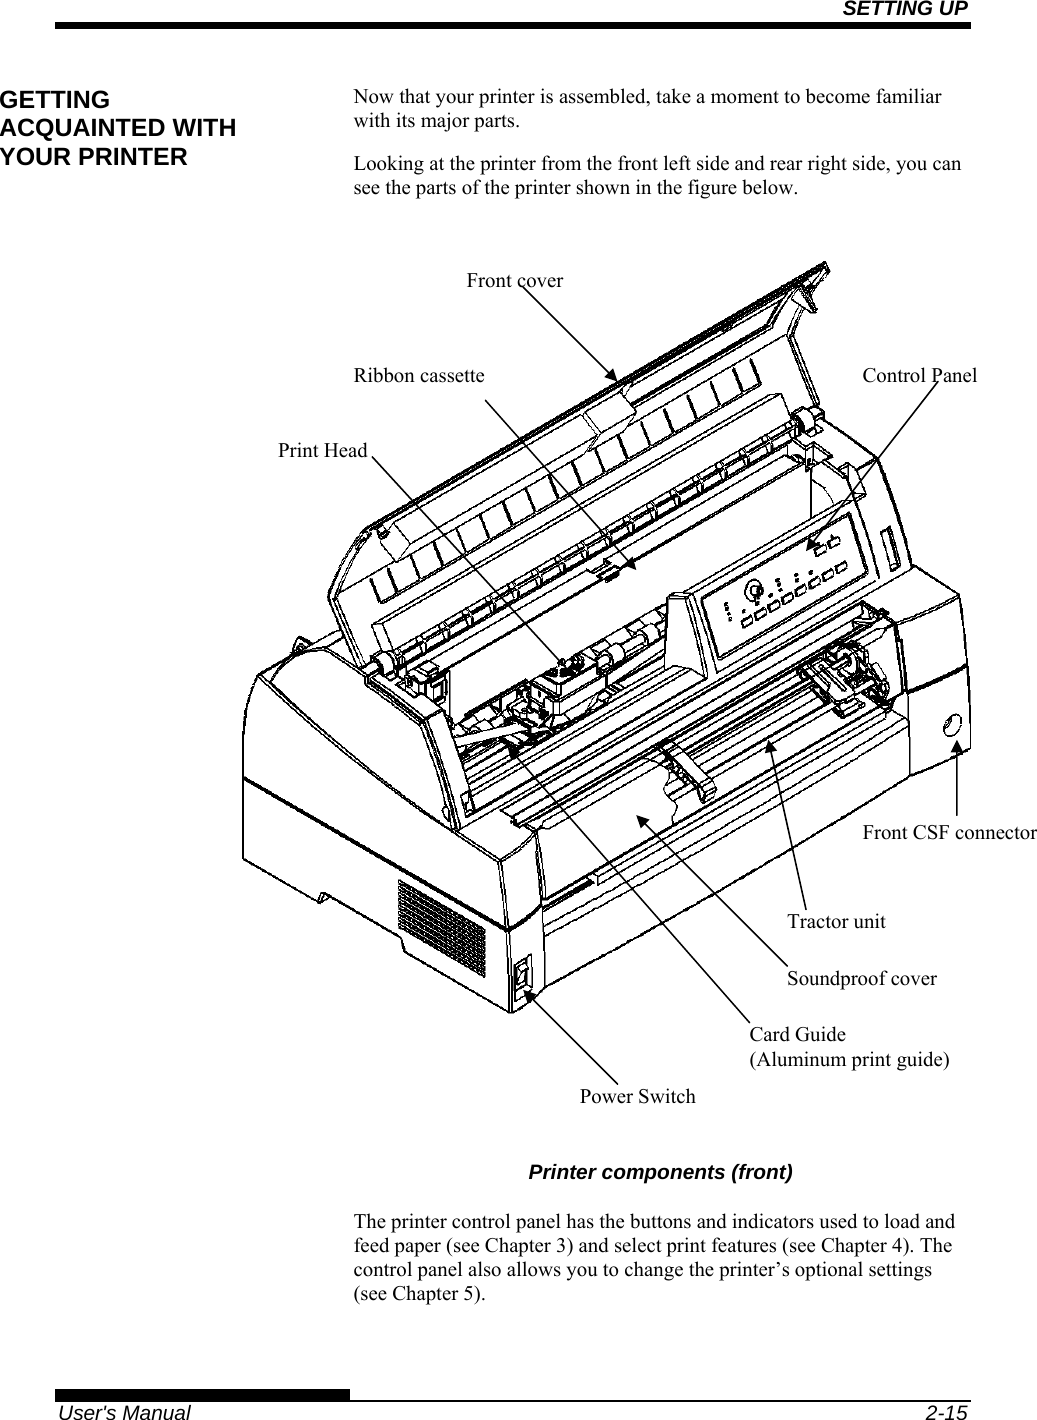 SETTING UP   User&apos;s Manual  2-15 Now that your printer is assembled, take a moment to become familiar with its major parts. Looking at the printer from the front left side and rear right side, you can see the parts of the printer shown in the figure below.      Printer components (front) The printer control panel has the buttons and indicators used to load and feed paper (see Chapter 3) and select print features (see Chapter 4). The control panel also allows you to change the printer’s optional settings (see Chapter 5).  GETTING ACQUAINTED WITH YOUR PRINTER Soundproof cover Tractor unit Front cover Ribbon cassette  Control Panel Power Switch Front CSF connector Print Head Card Guide (Aluminum print guide) 